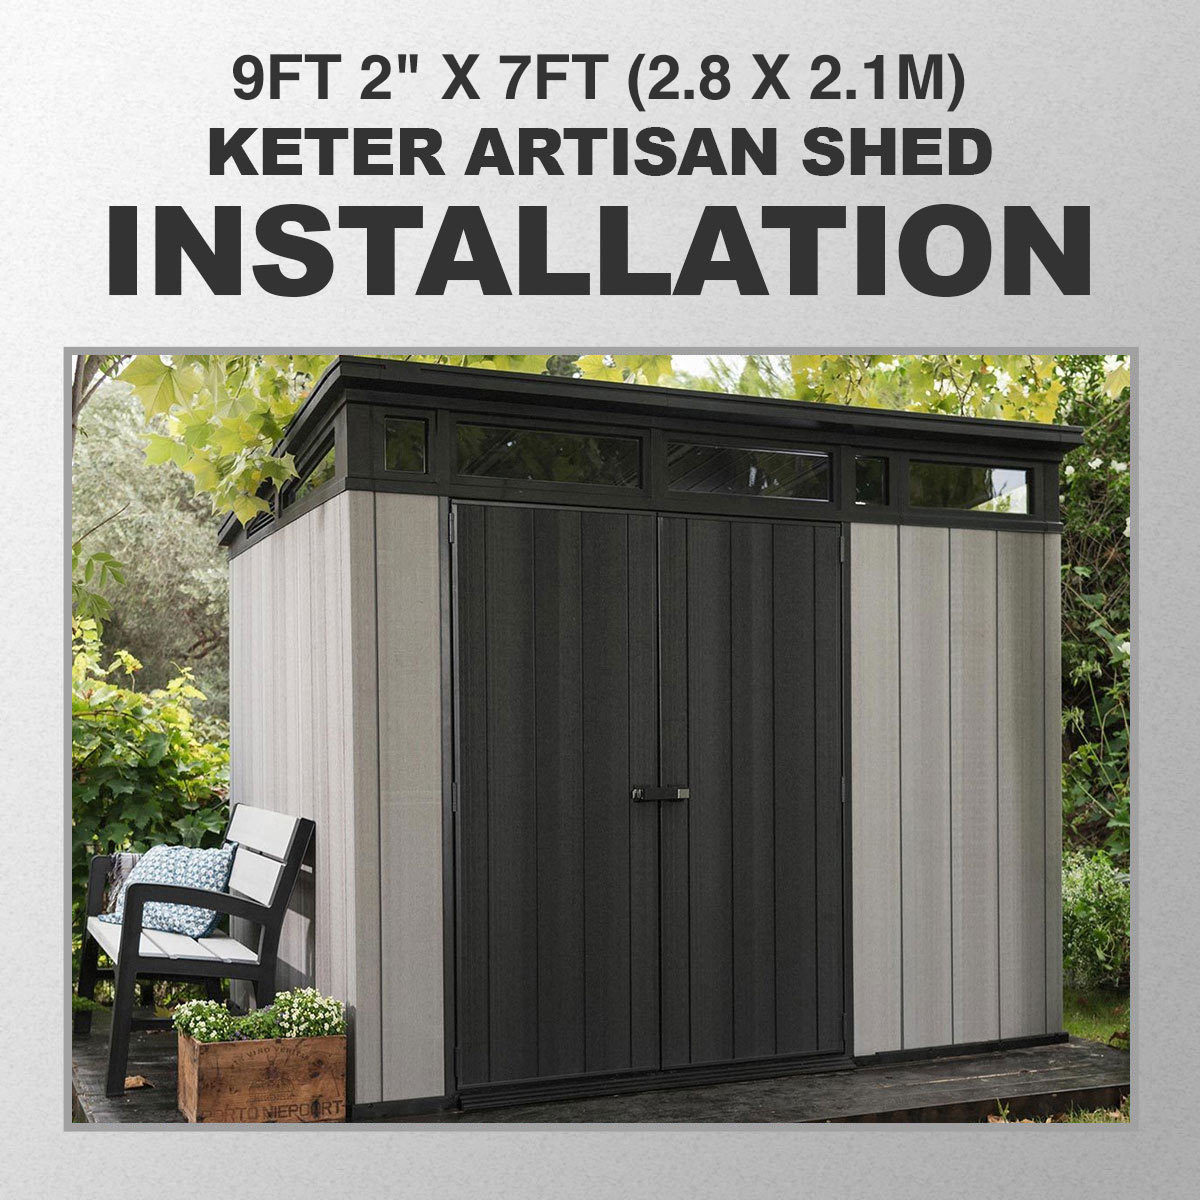 Installation for Keter Artisan 9ft 2" x 7ft (2.8 x 2.1m) Shed